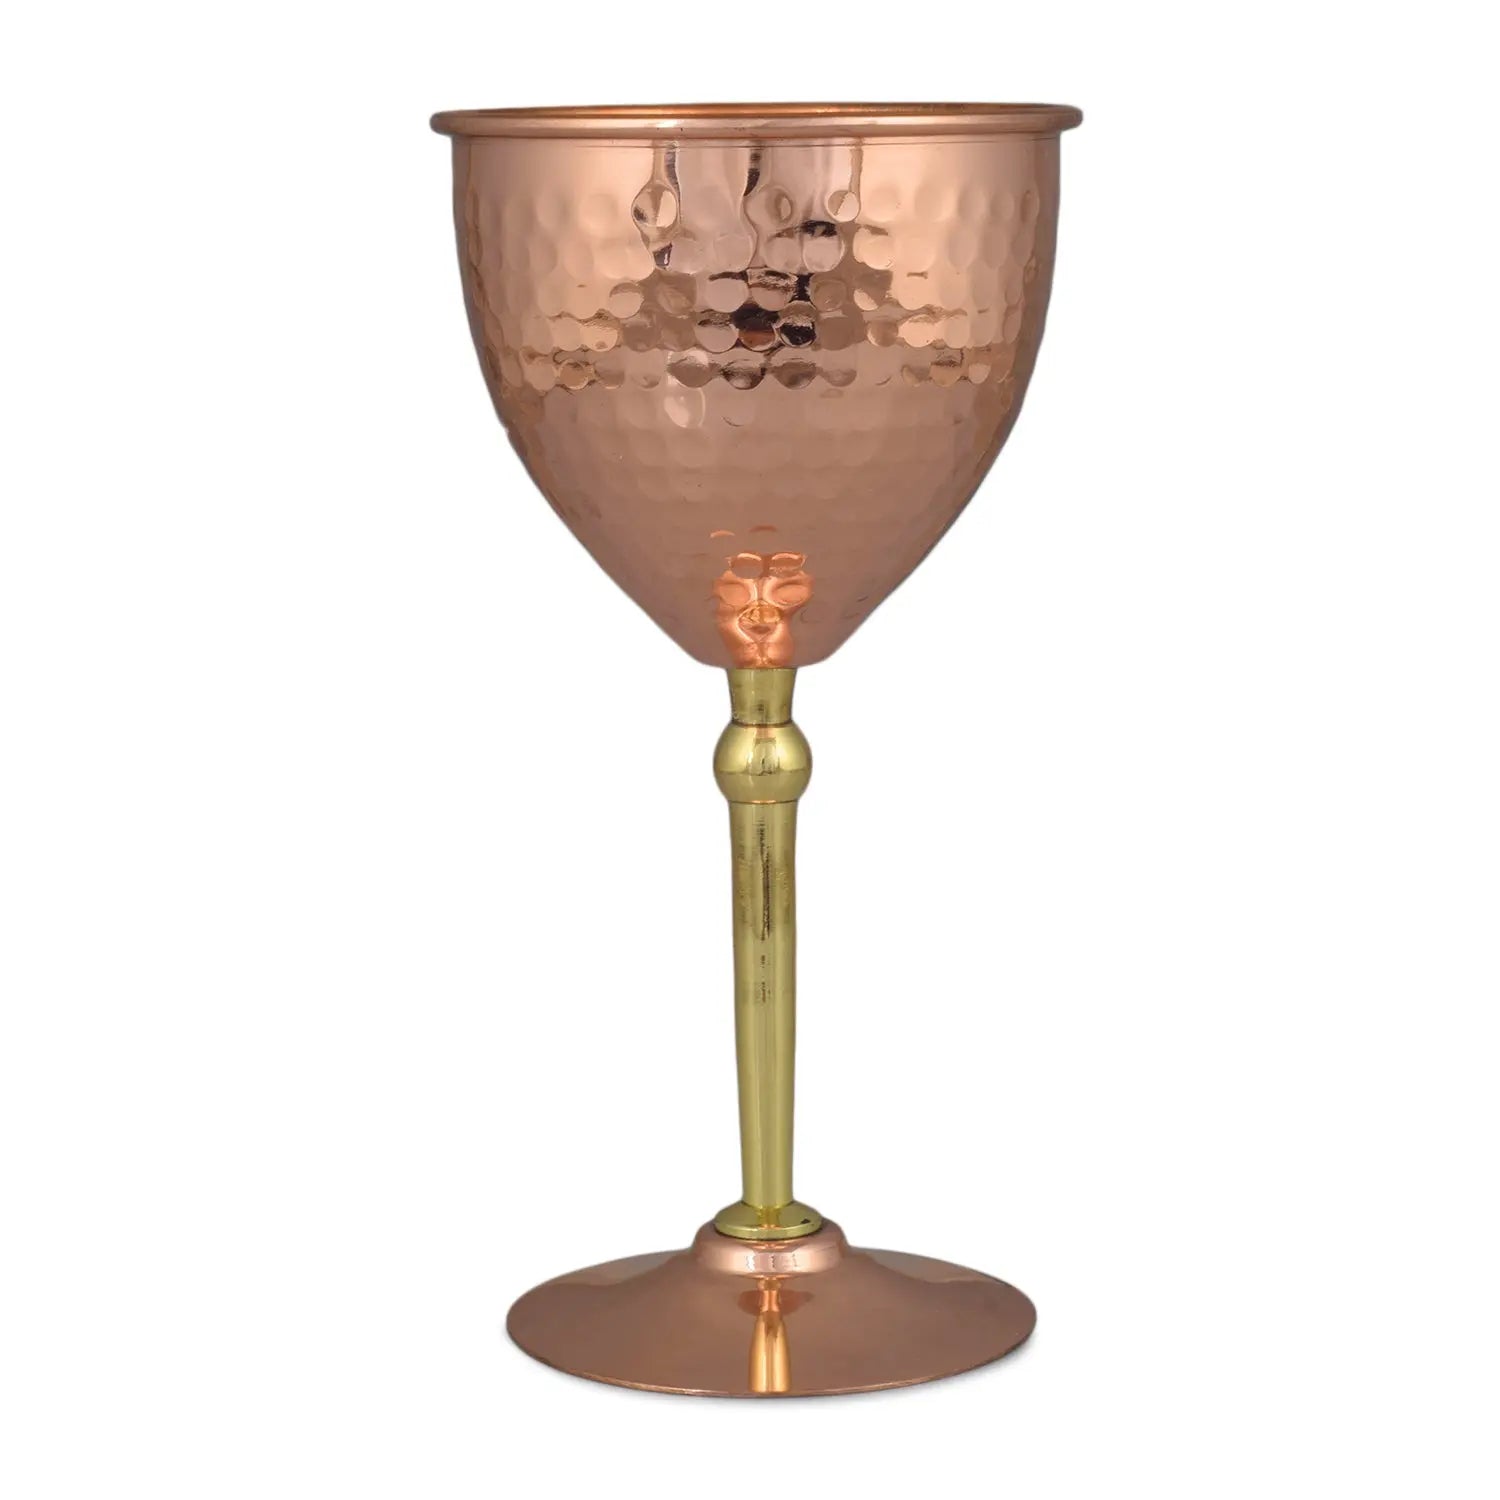 Copper Wine Glass For Parties, Drinks, Mocktails Bar Serveware 350 ML | Set Of 1 Glass - CROCKERY WALA AND COMPANY 